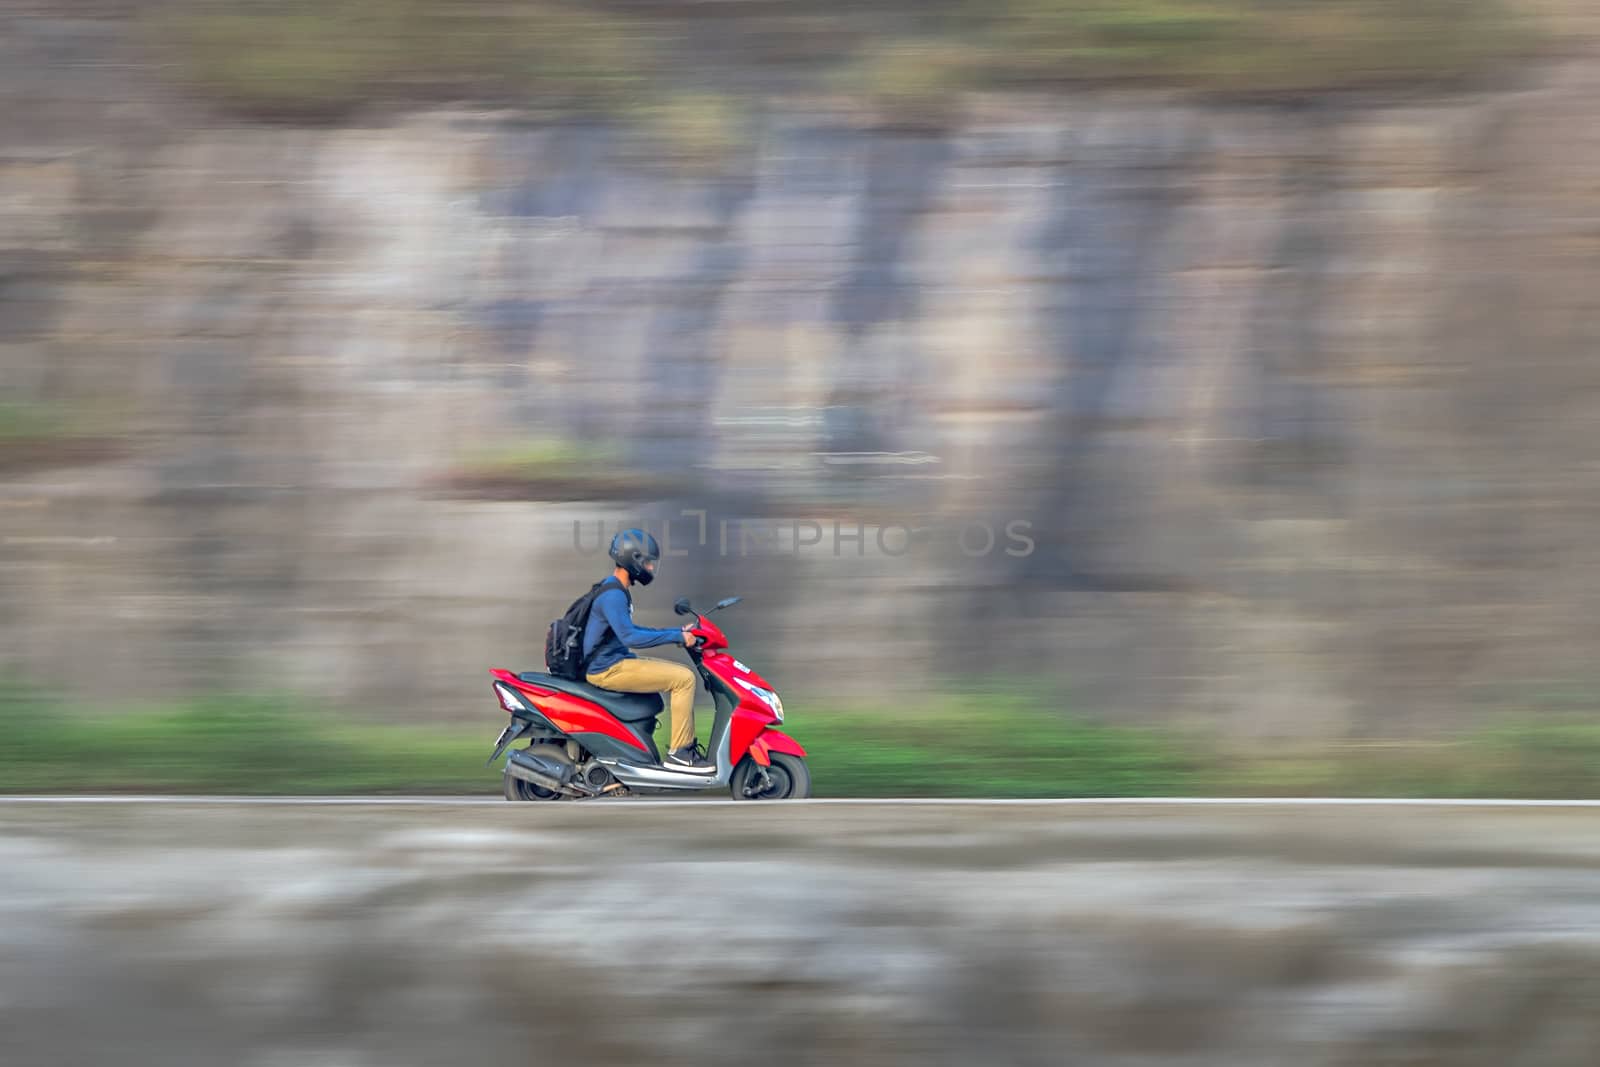 Motion blur image of a rider wearing helmet for safety, riding uphill on a red two wheeler moped. by lalam